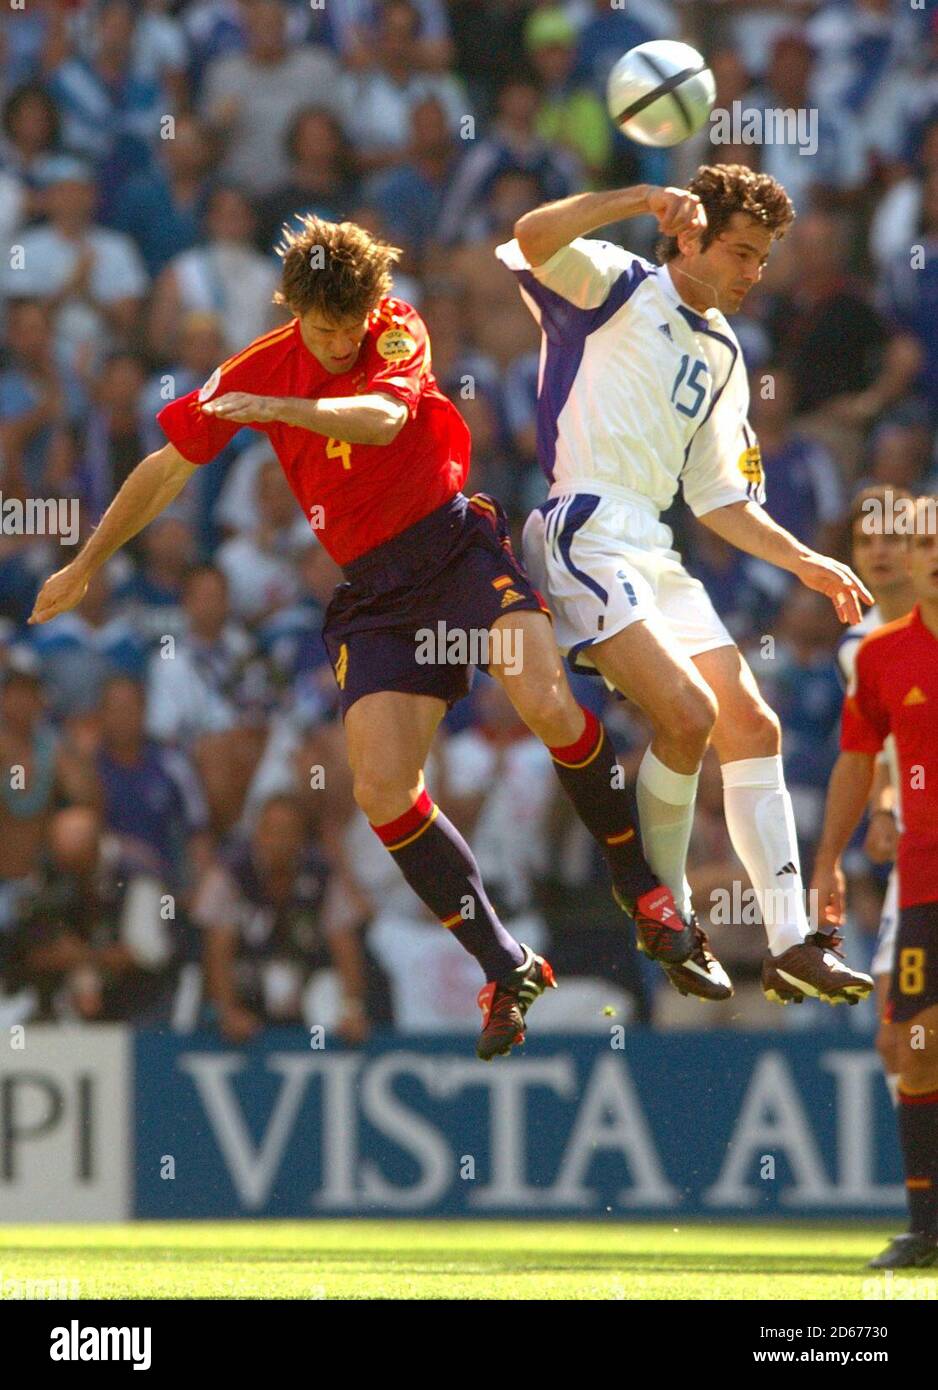 Greece's Zisis Vryzas (r) and Spain's David Albelda battle for the ball Stock Photo